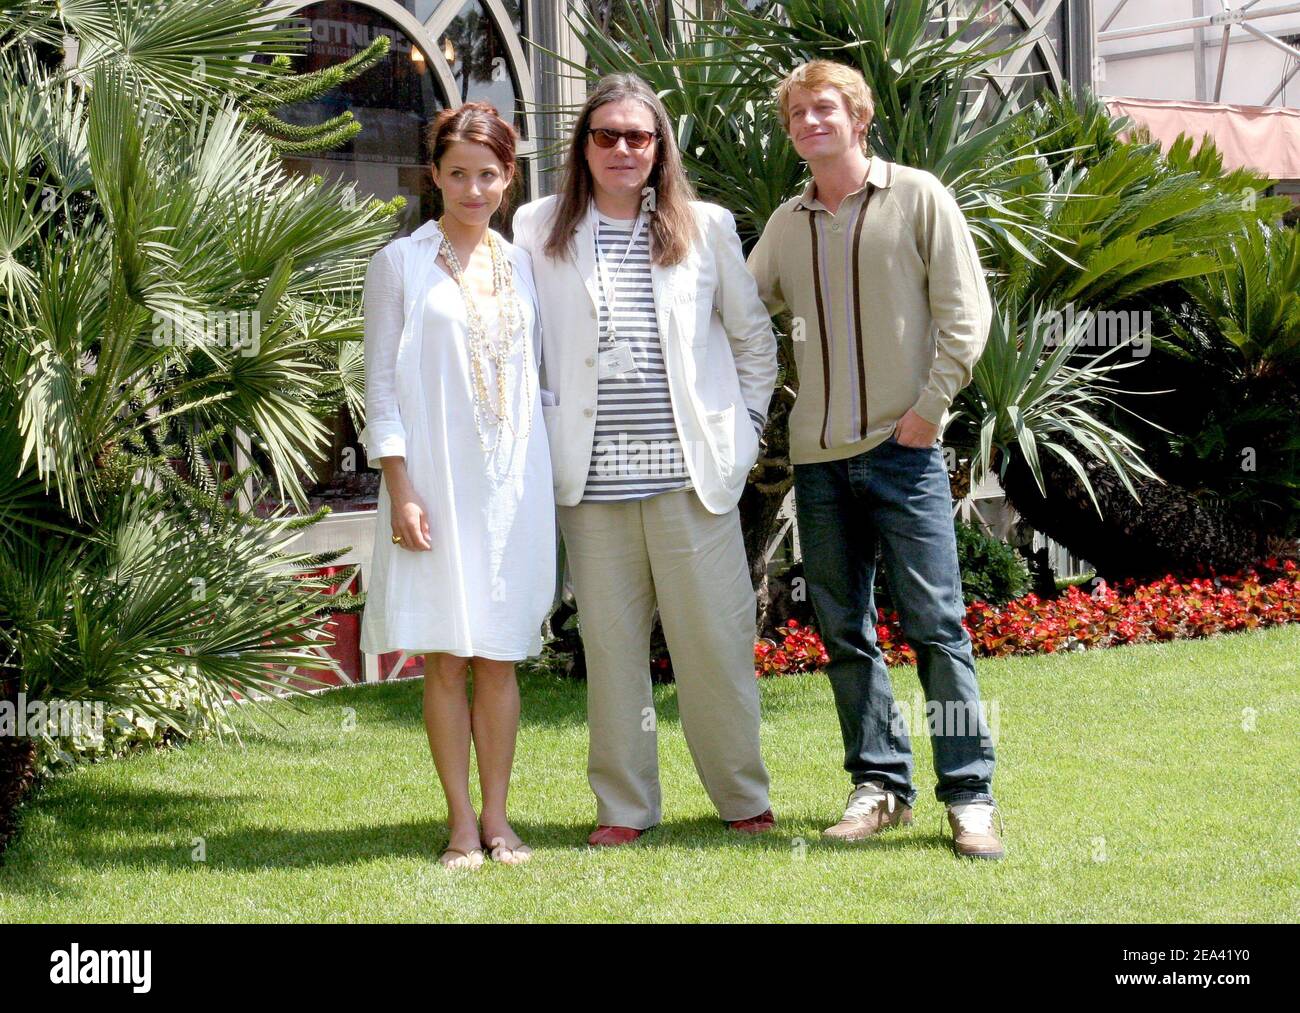 Stephen Woolley surrounded by Swedish actress Tuva Novotny (L) and Leo Gregory (R) pose for a photocall in the garden of Majestic Hotel during the 58th International Cannes Film Festival May 13, 2005 in Cannes, France. Photo by Benoit Pinguet/ABACA Stock Photo